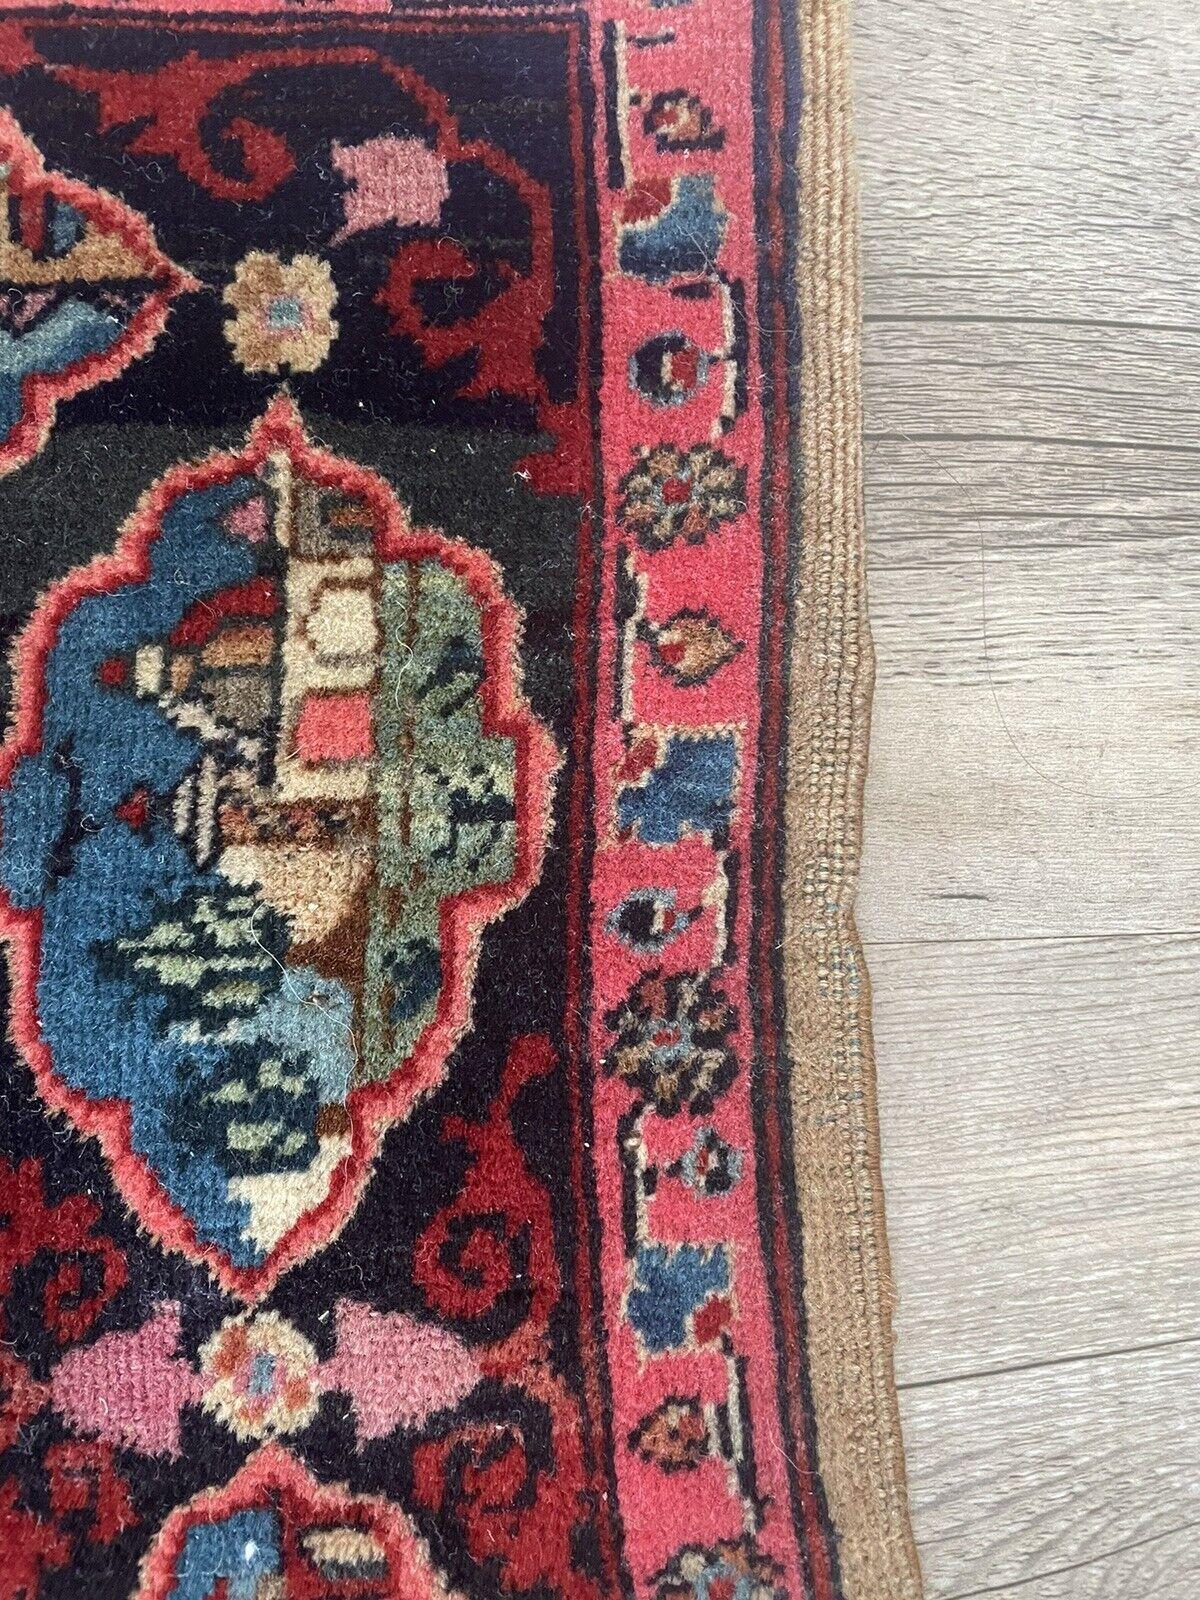 Handmade Antique Persian Kashan Collectible Rug 1.6' x 2.4, 1880s - 1N09 For Sale 6